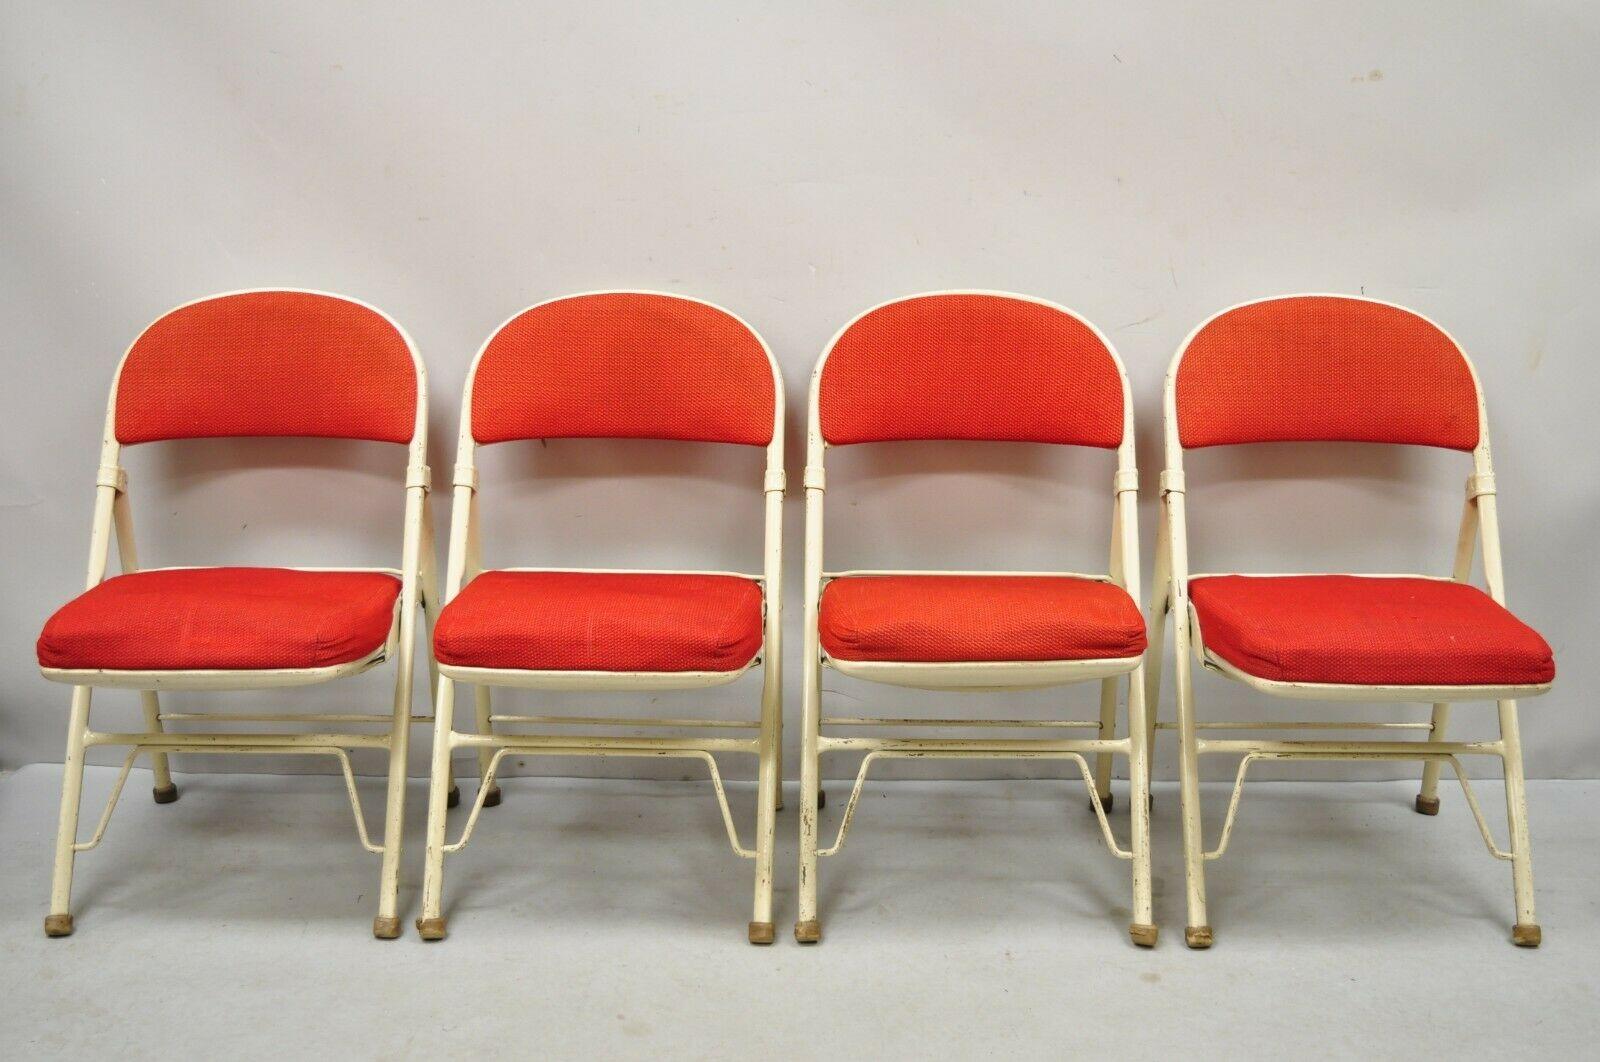 Vintage American Seating Metal Frame Red Upholstered Folding Chairs, Set of 4 For Sale 6